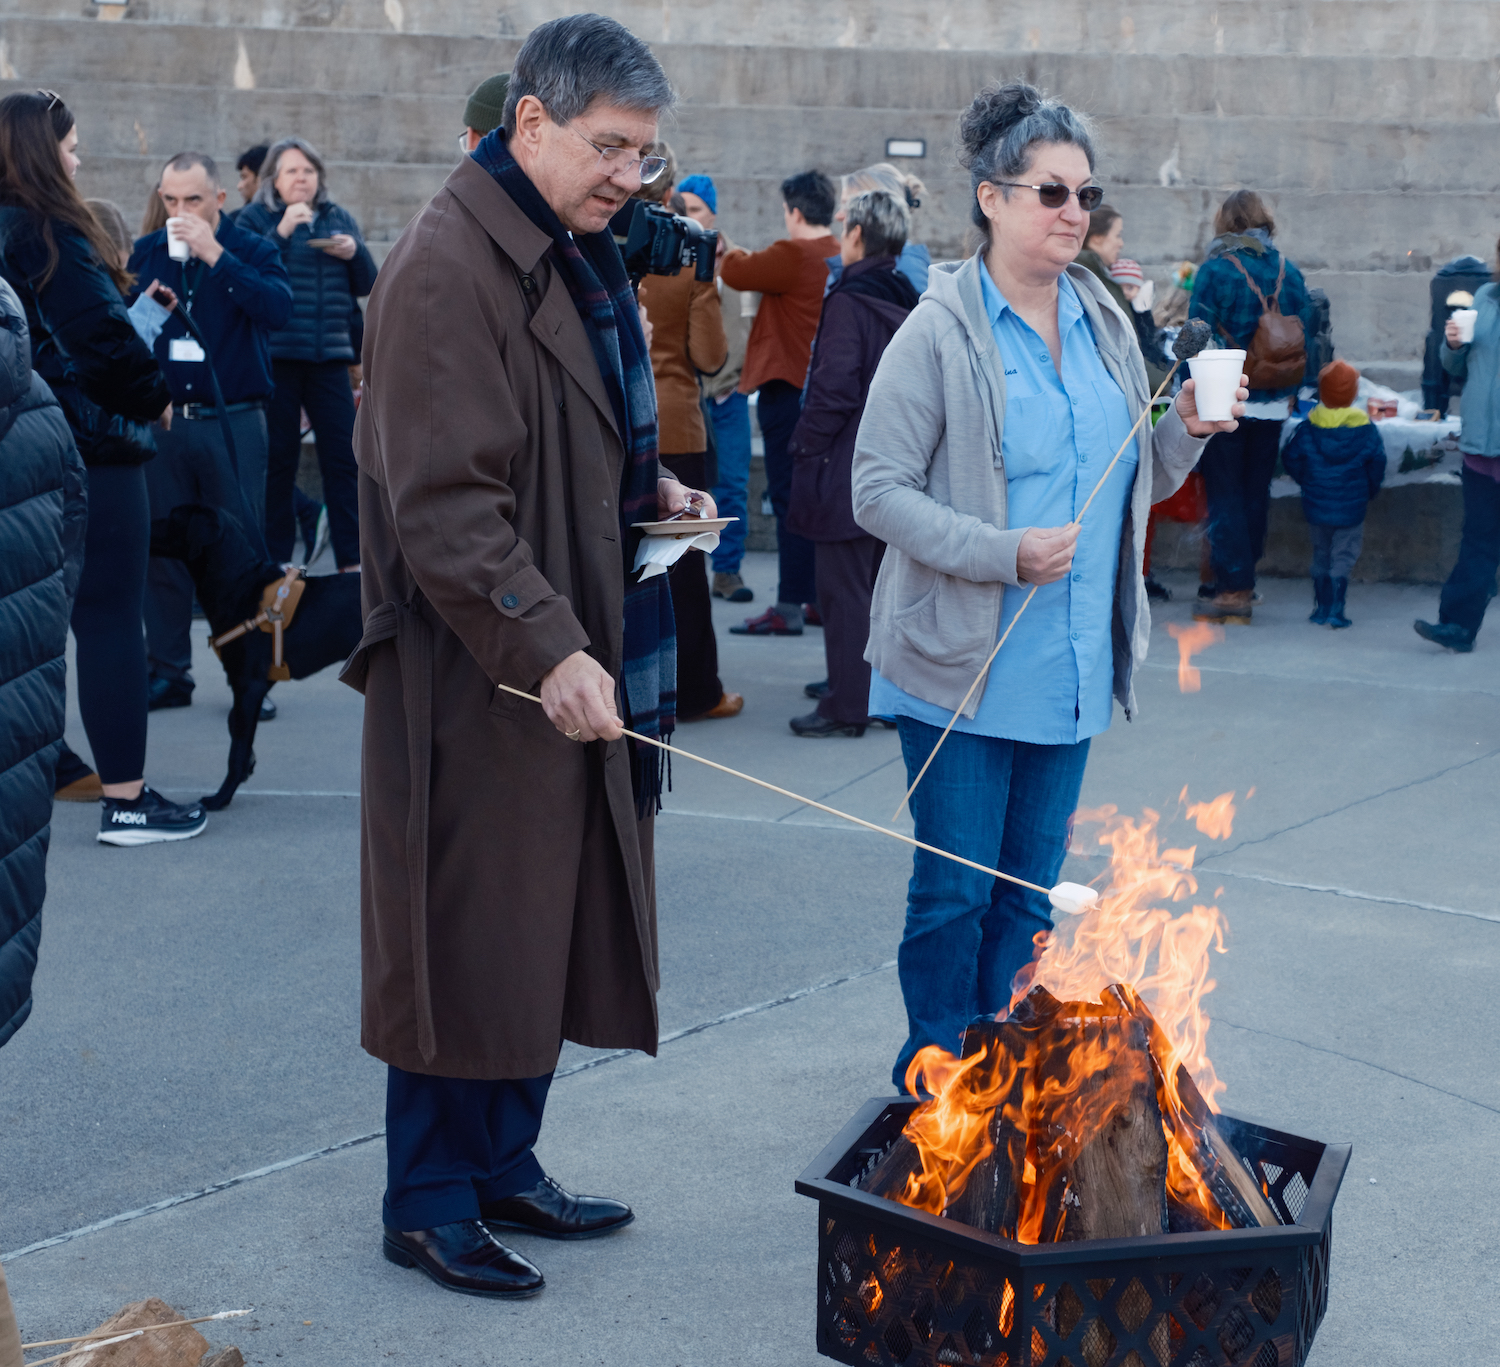 Dr. James Nemitz stands roasting a marshmallow next to campus service worker Gina Griffin who has finished her marshmellow.